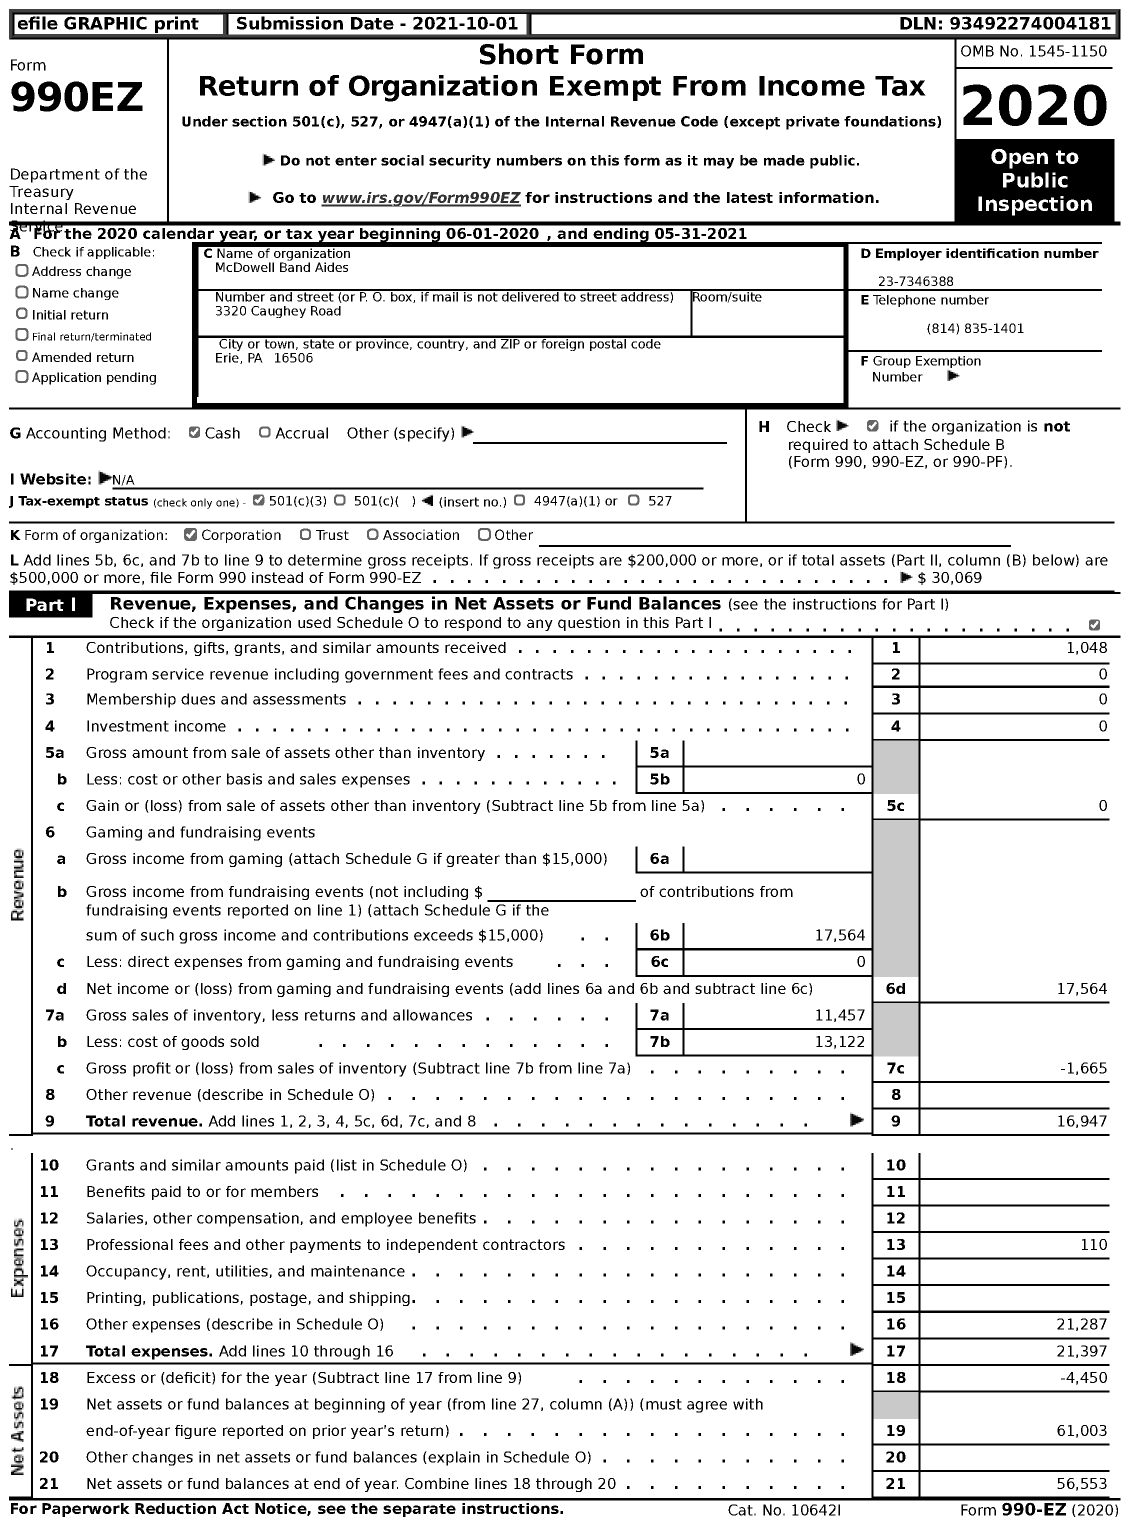 Image of first page of 2020 Form 990EZ for McDowell Band Aides